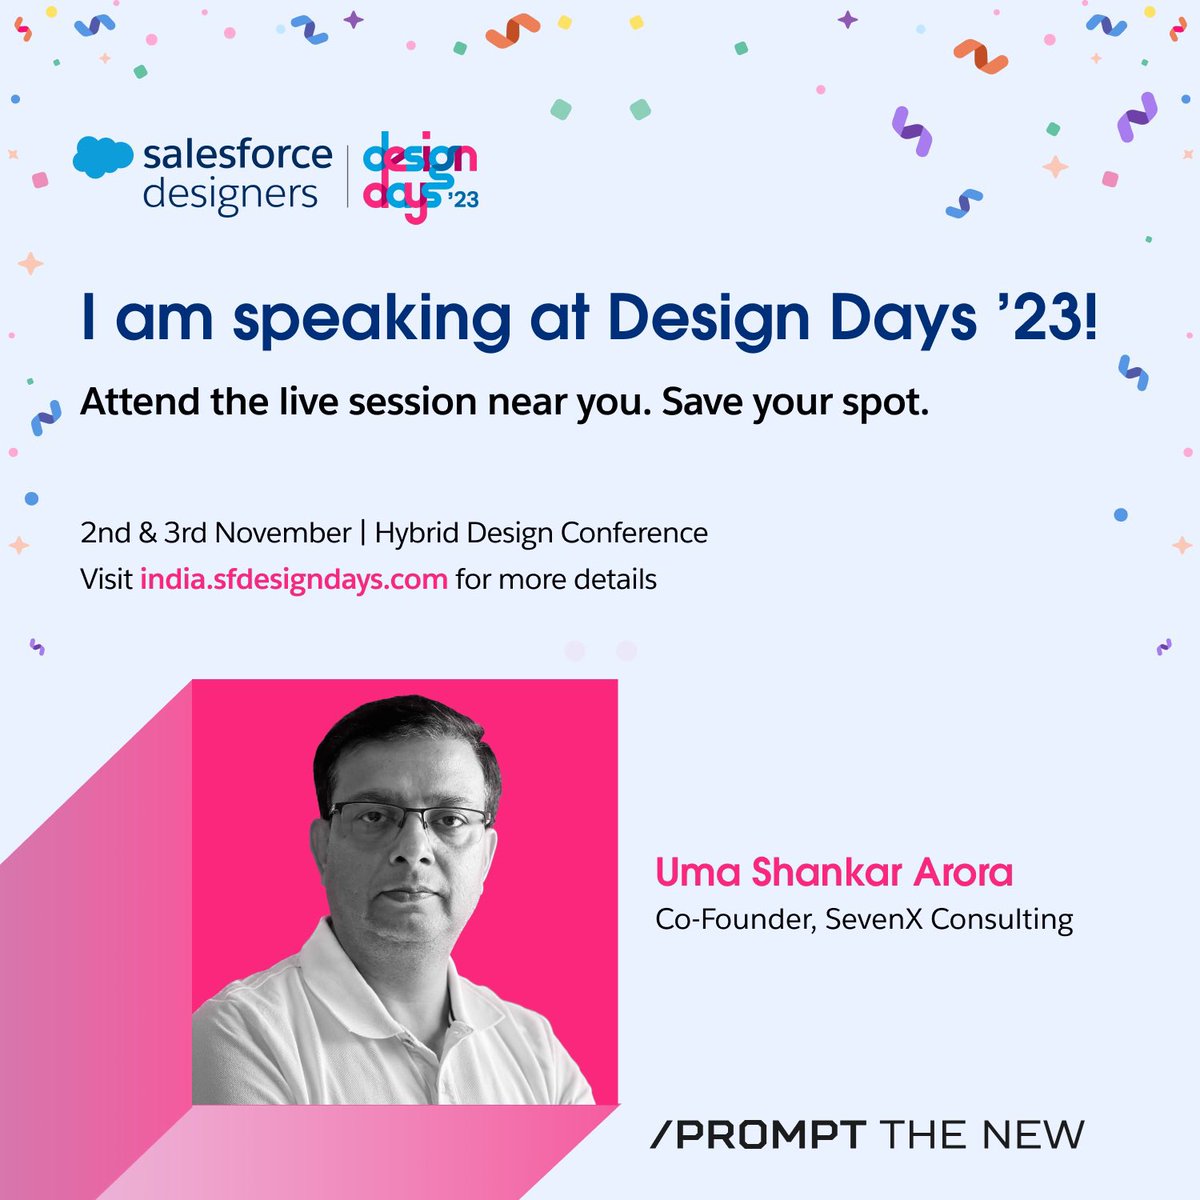 Thrilled to speak at Design Days—an inspiring celebration of creativity and innovation. Let's explore new design horizons and connect with fellow creatives. See you there!

#sfdesigndays #designdays23 #promptthenew #salesforcedesigners #designconference #designdays #designevent